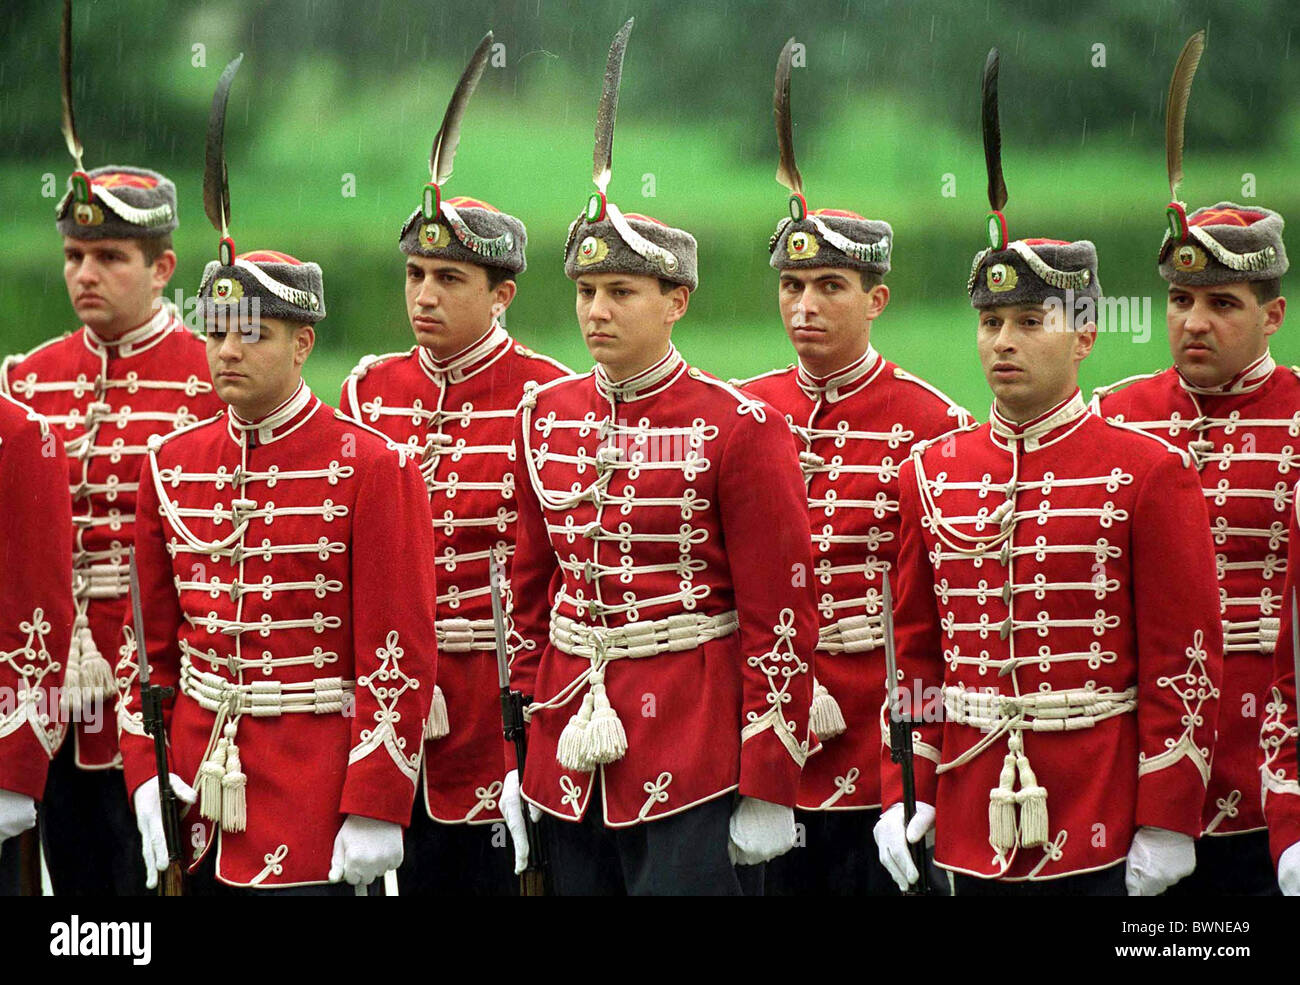 CEREMONIAL GUARD OF HONOUR, DRESSED IN RED JACKETS AND FUR HATS TRIMMED WITH A FEATHER, BULGARIA Stock Photo